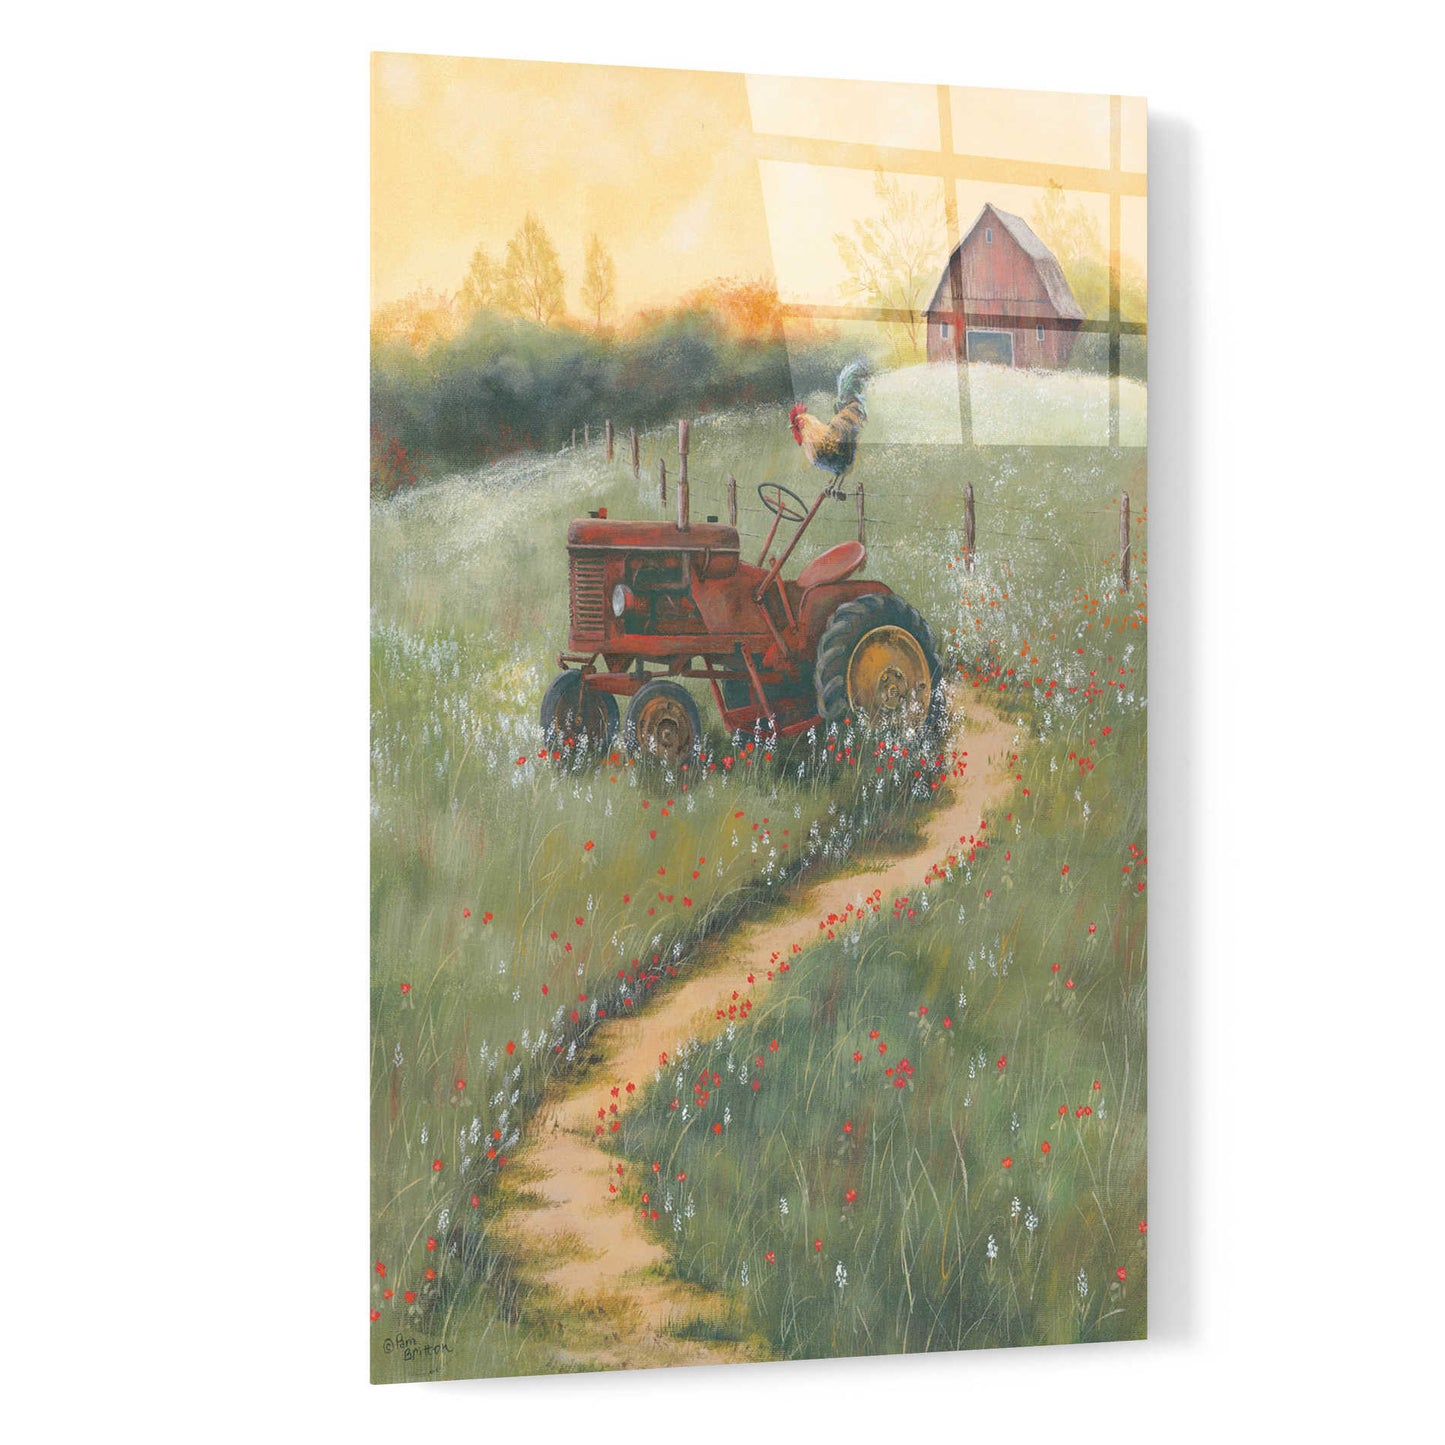 Epic Art 'The Old Tractor' by Pam Britton, Acrylic Glass Wall Art,16x24